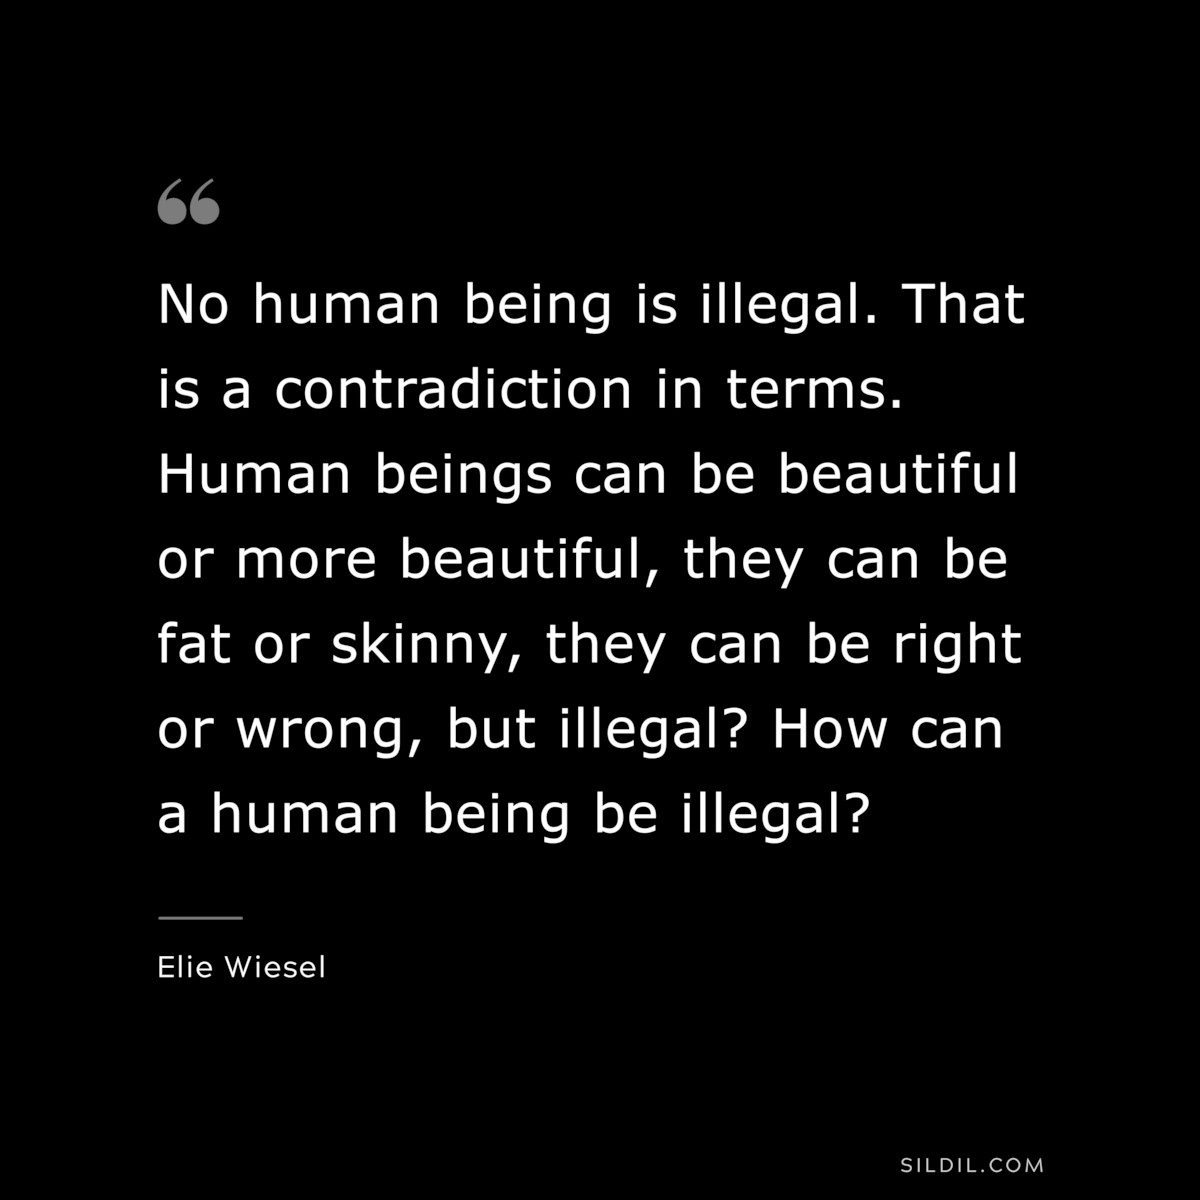 No human being is illegal. That is a contradiction in terms. Human beings can be beautiful or more beautiful, they can be fat or skinny, they can be right or wrong, but illegal? How can a human being be illegal? ― Elie Wiesel